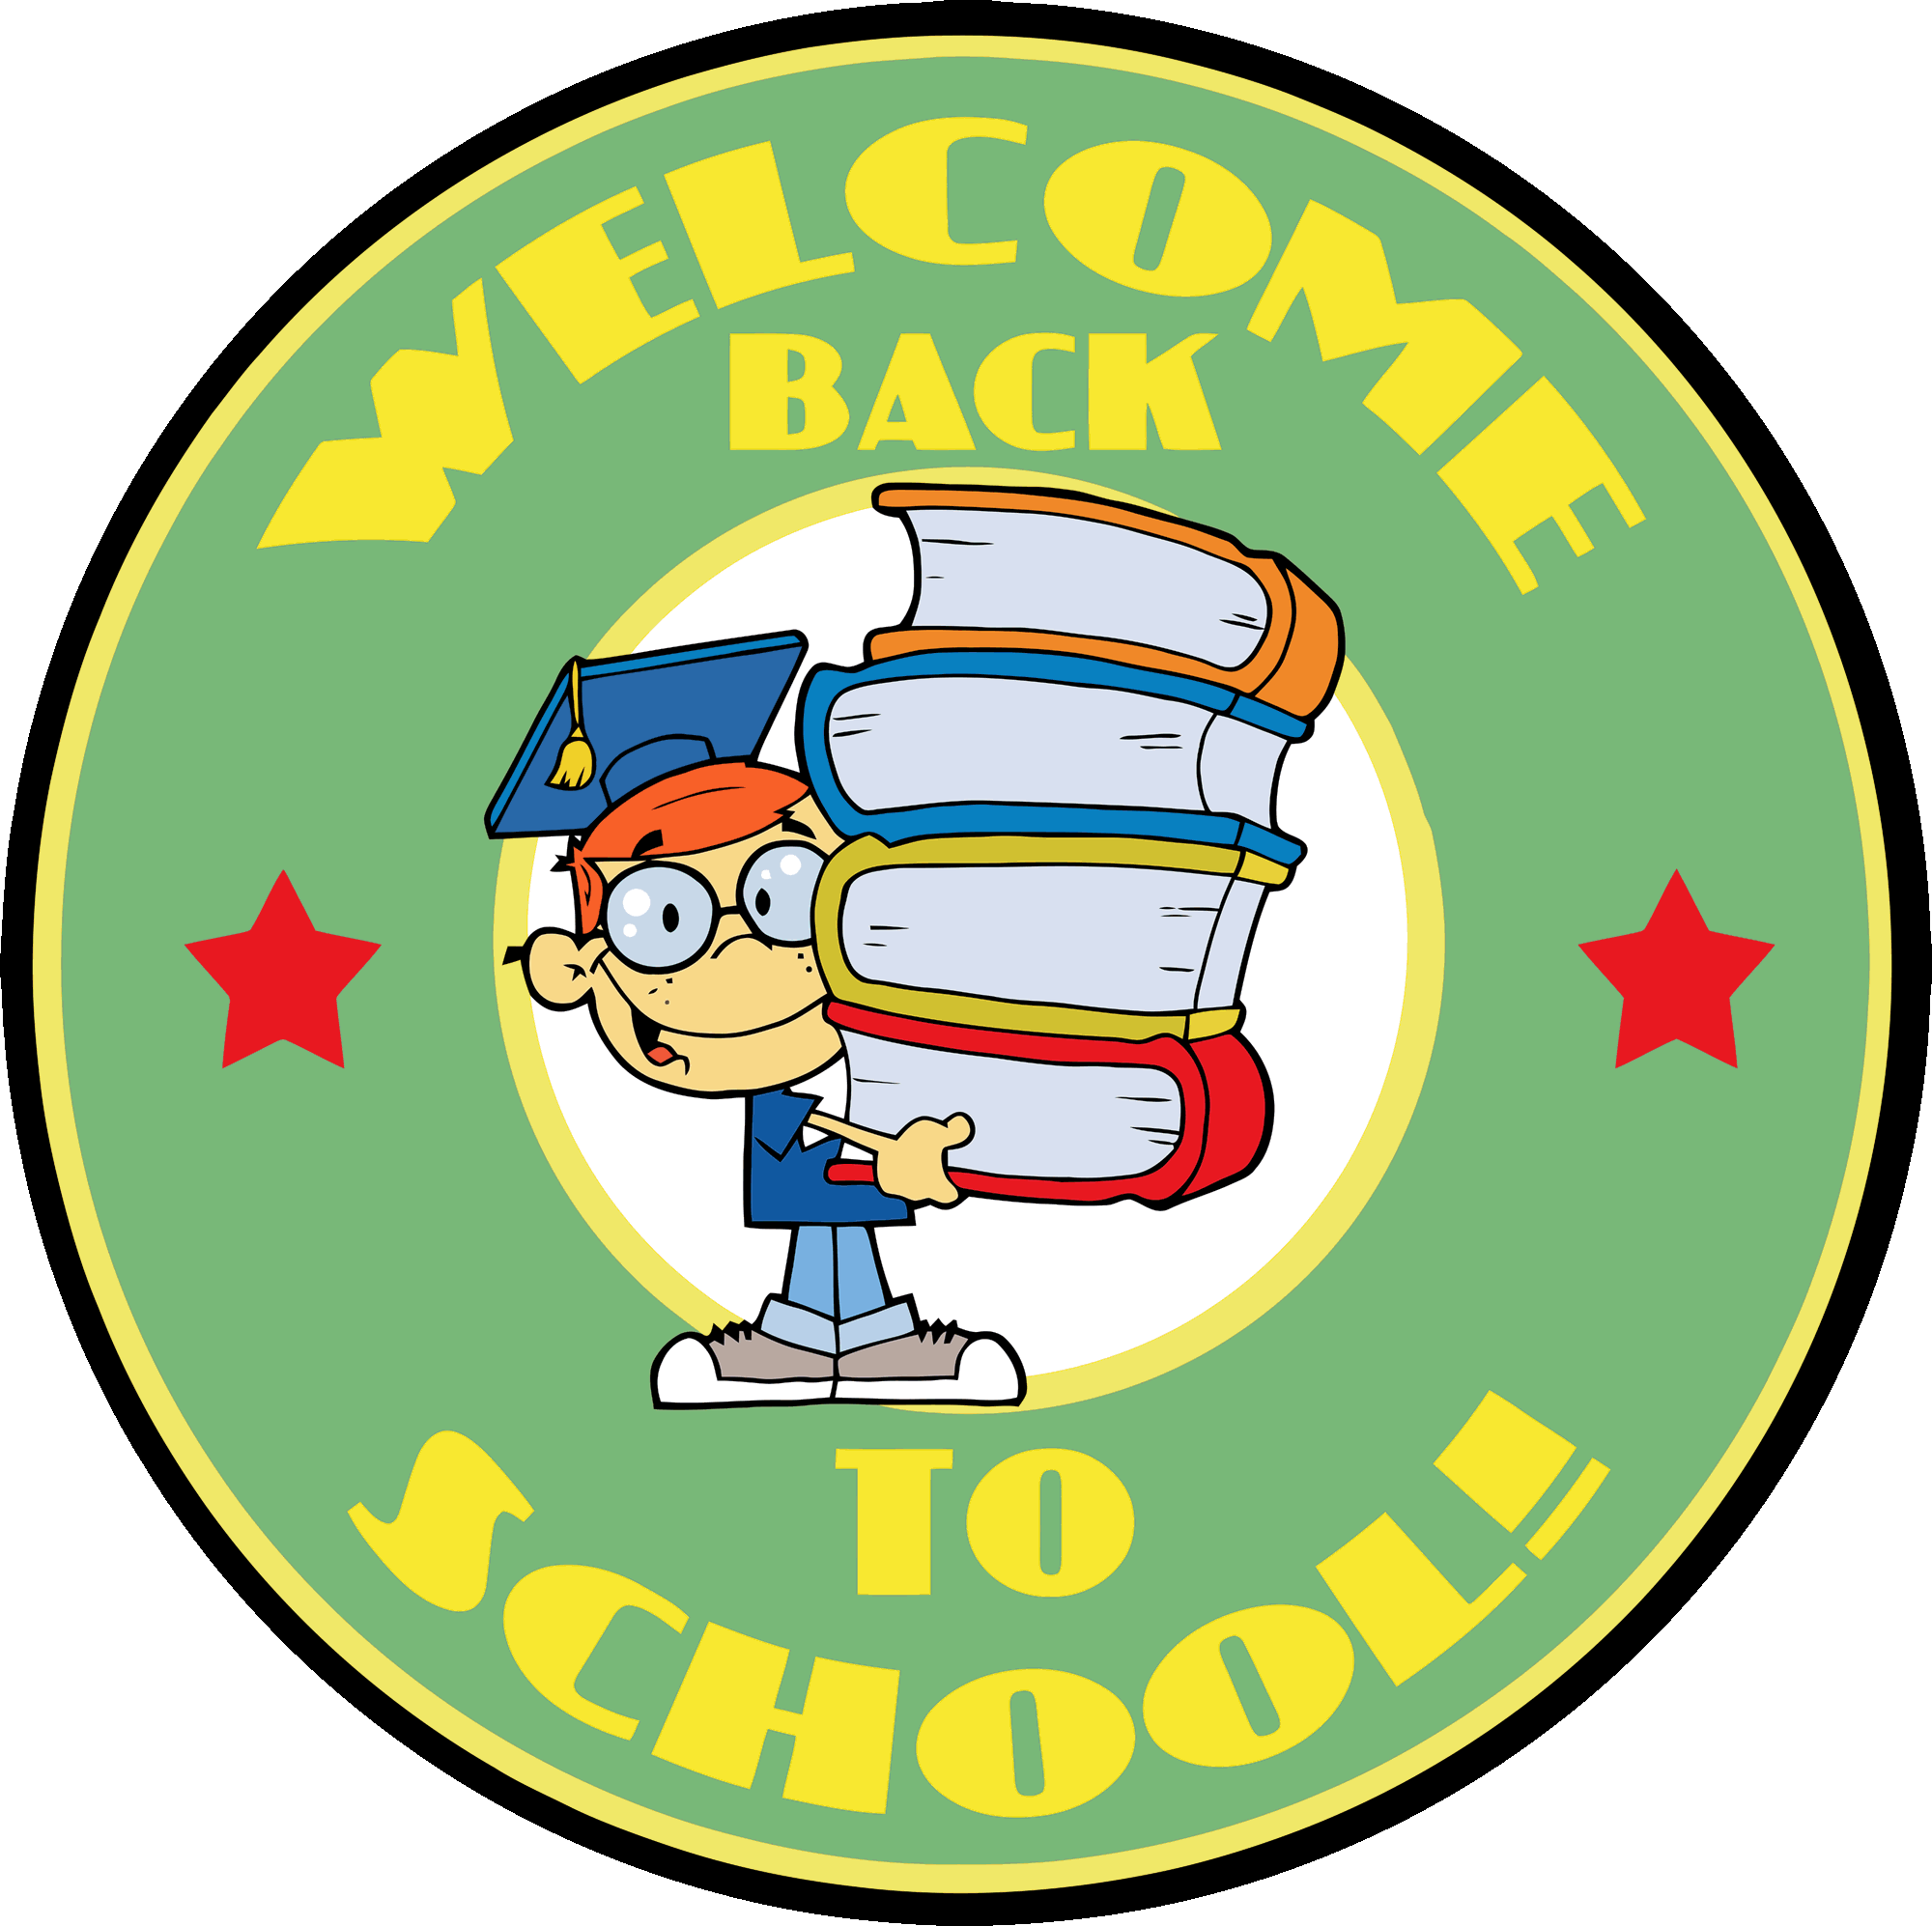 Back to school welcome clipart